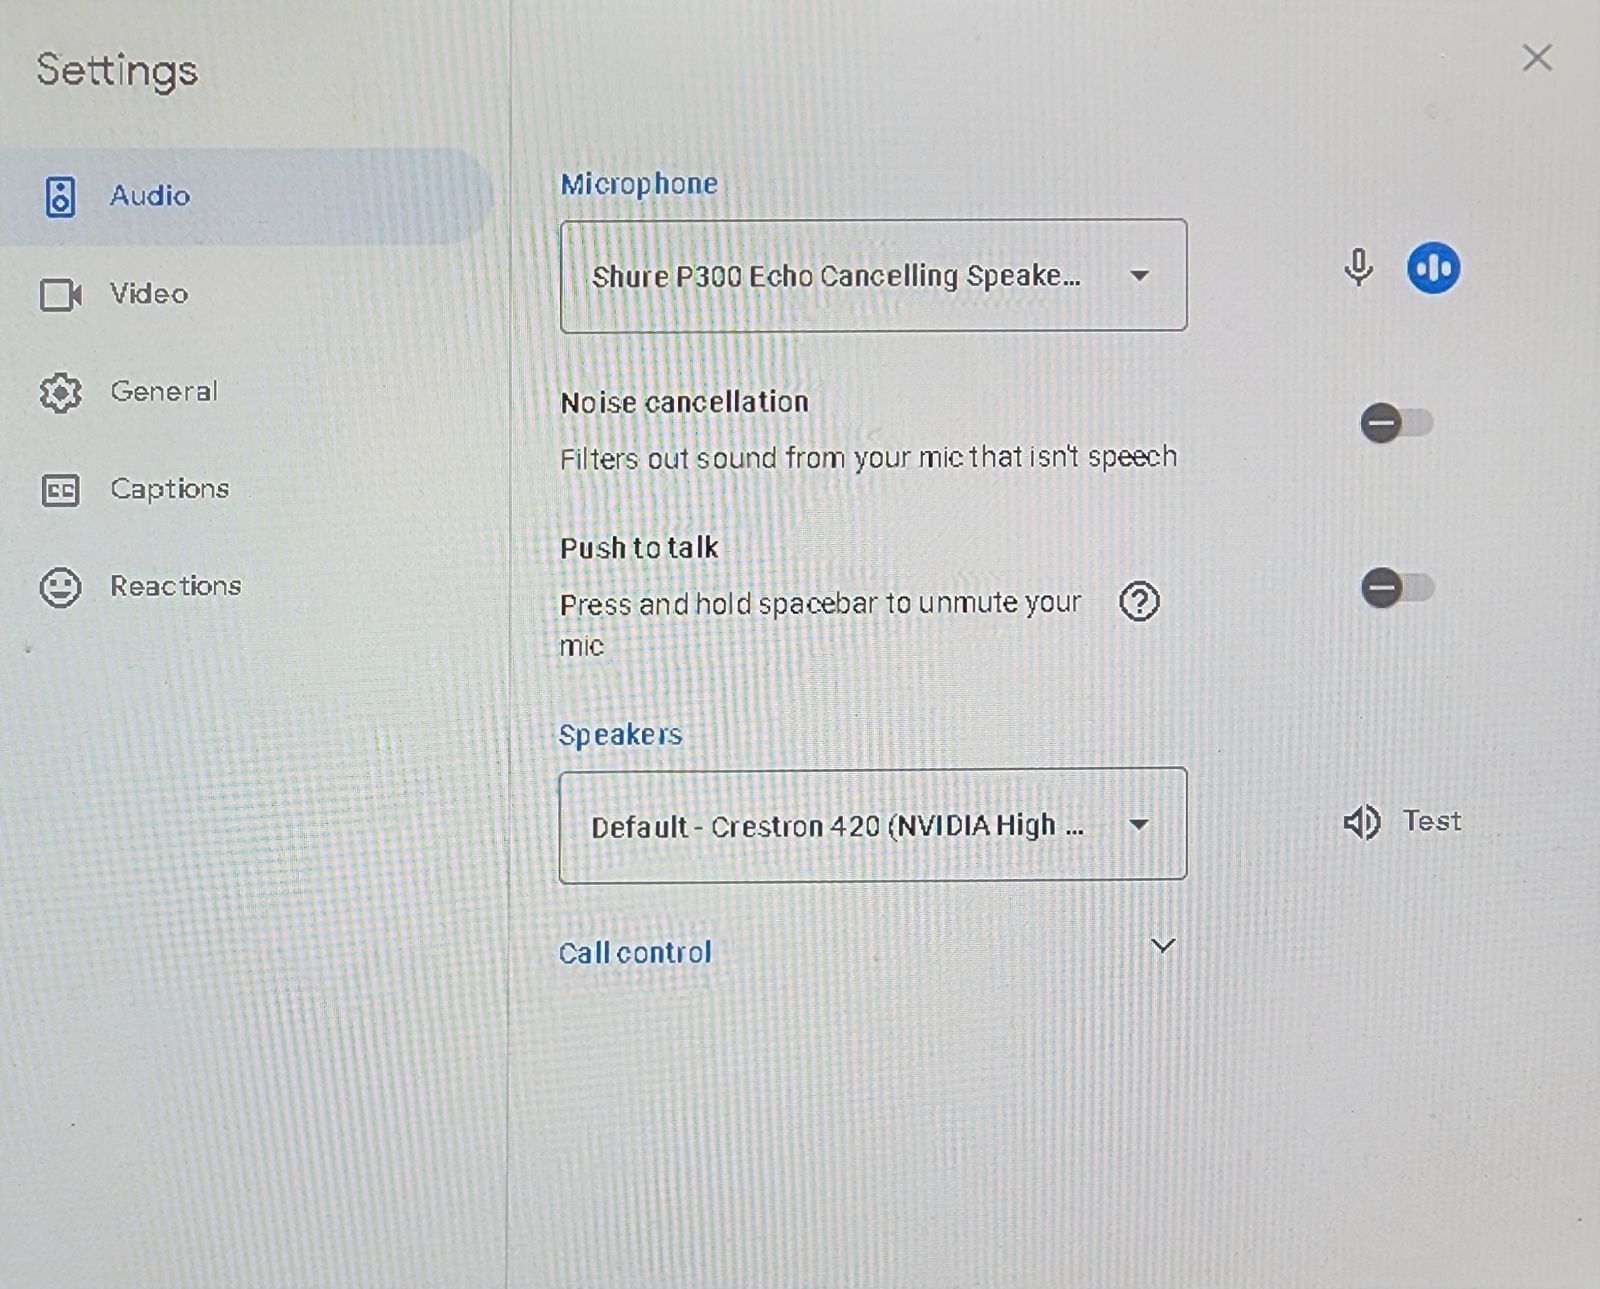 Settings Menu displayed with Audio sub menu selected. Audio options shown with Shure P300 Echo Cancelling Speake chosen for Microphone option and Default  - Crestron 420 (NVIDIA High chosen for Speakers